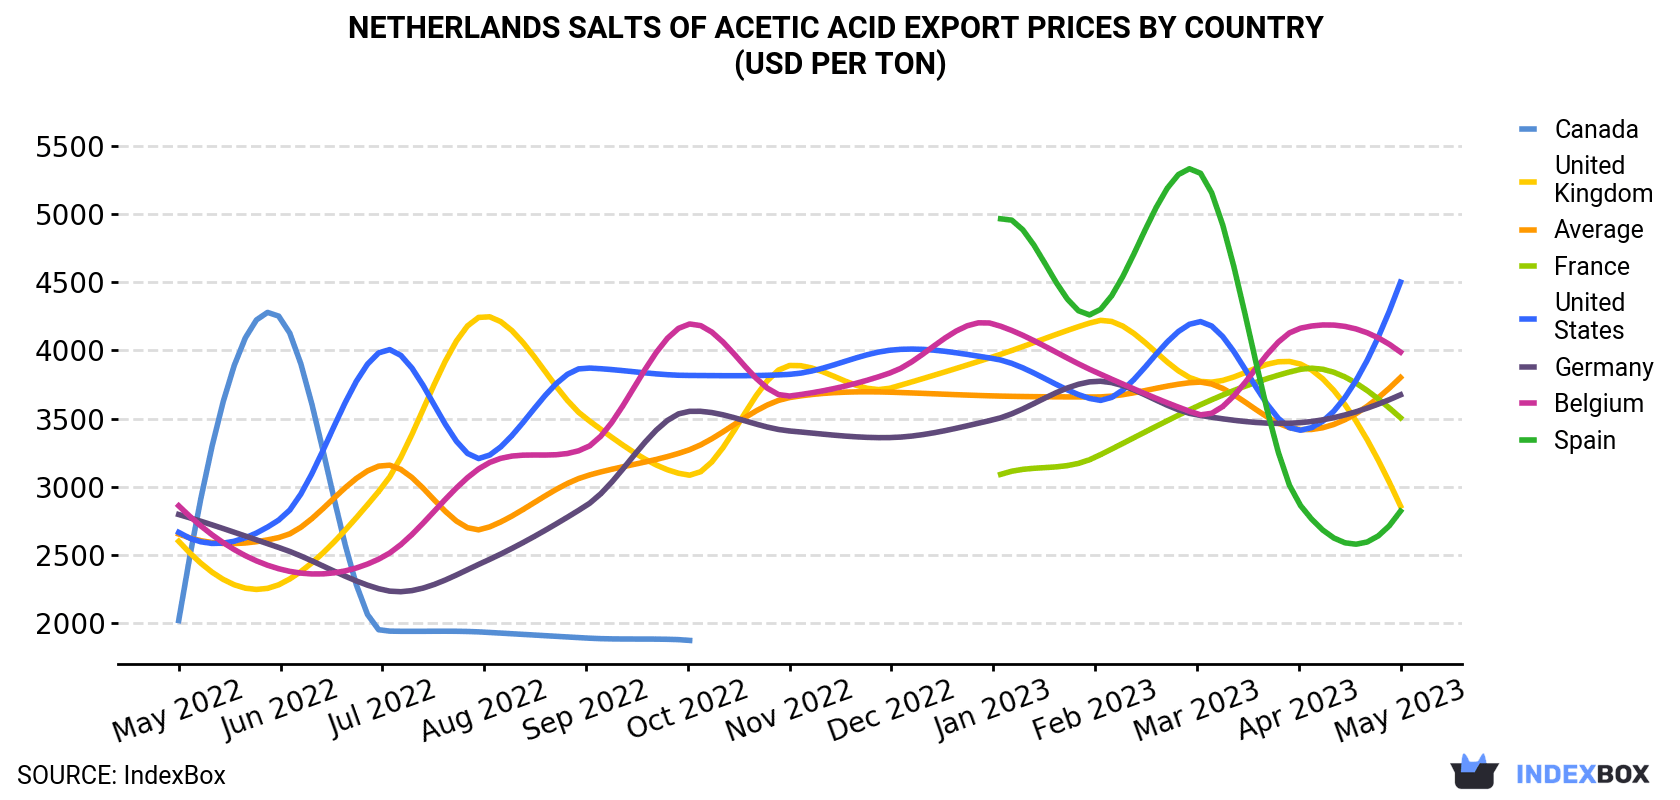 Netherlands Salts Of Acetic Acid Export Prices By Country (USD Per Ton)